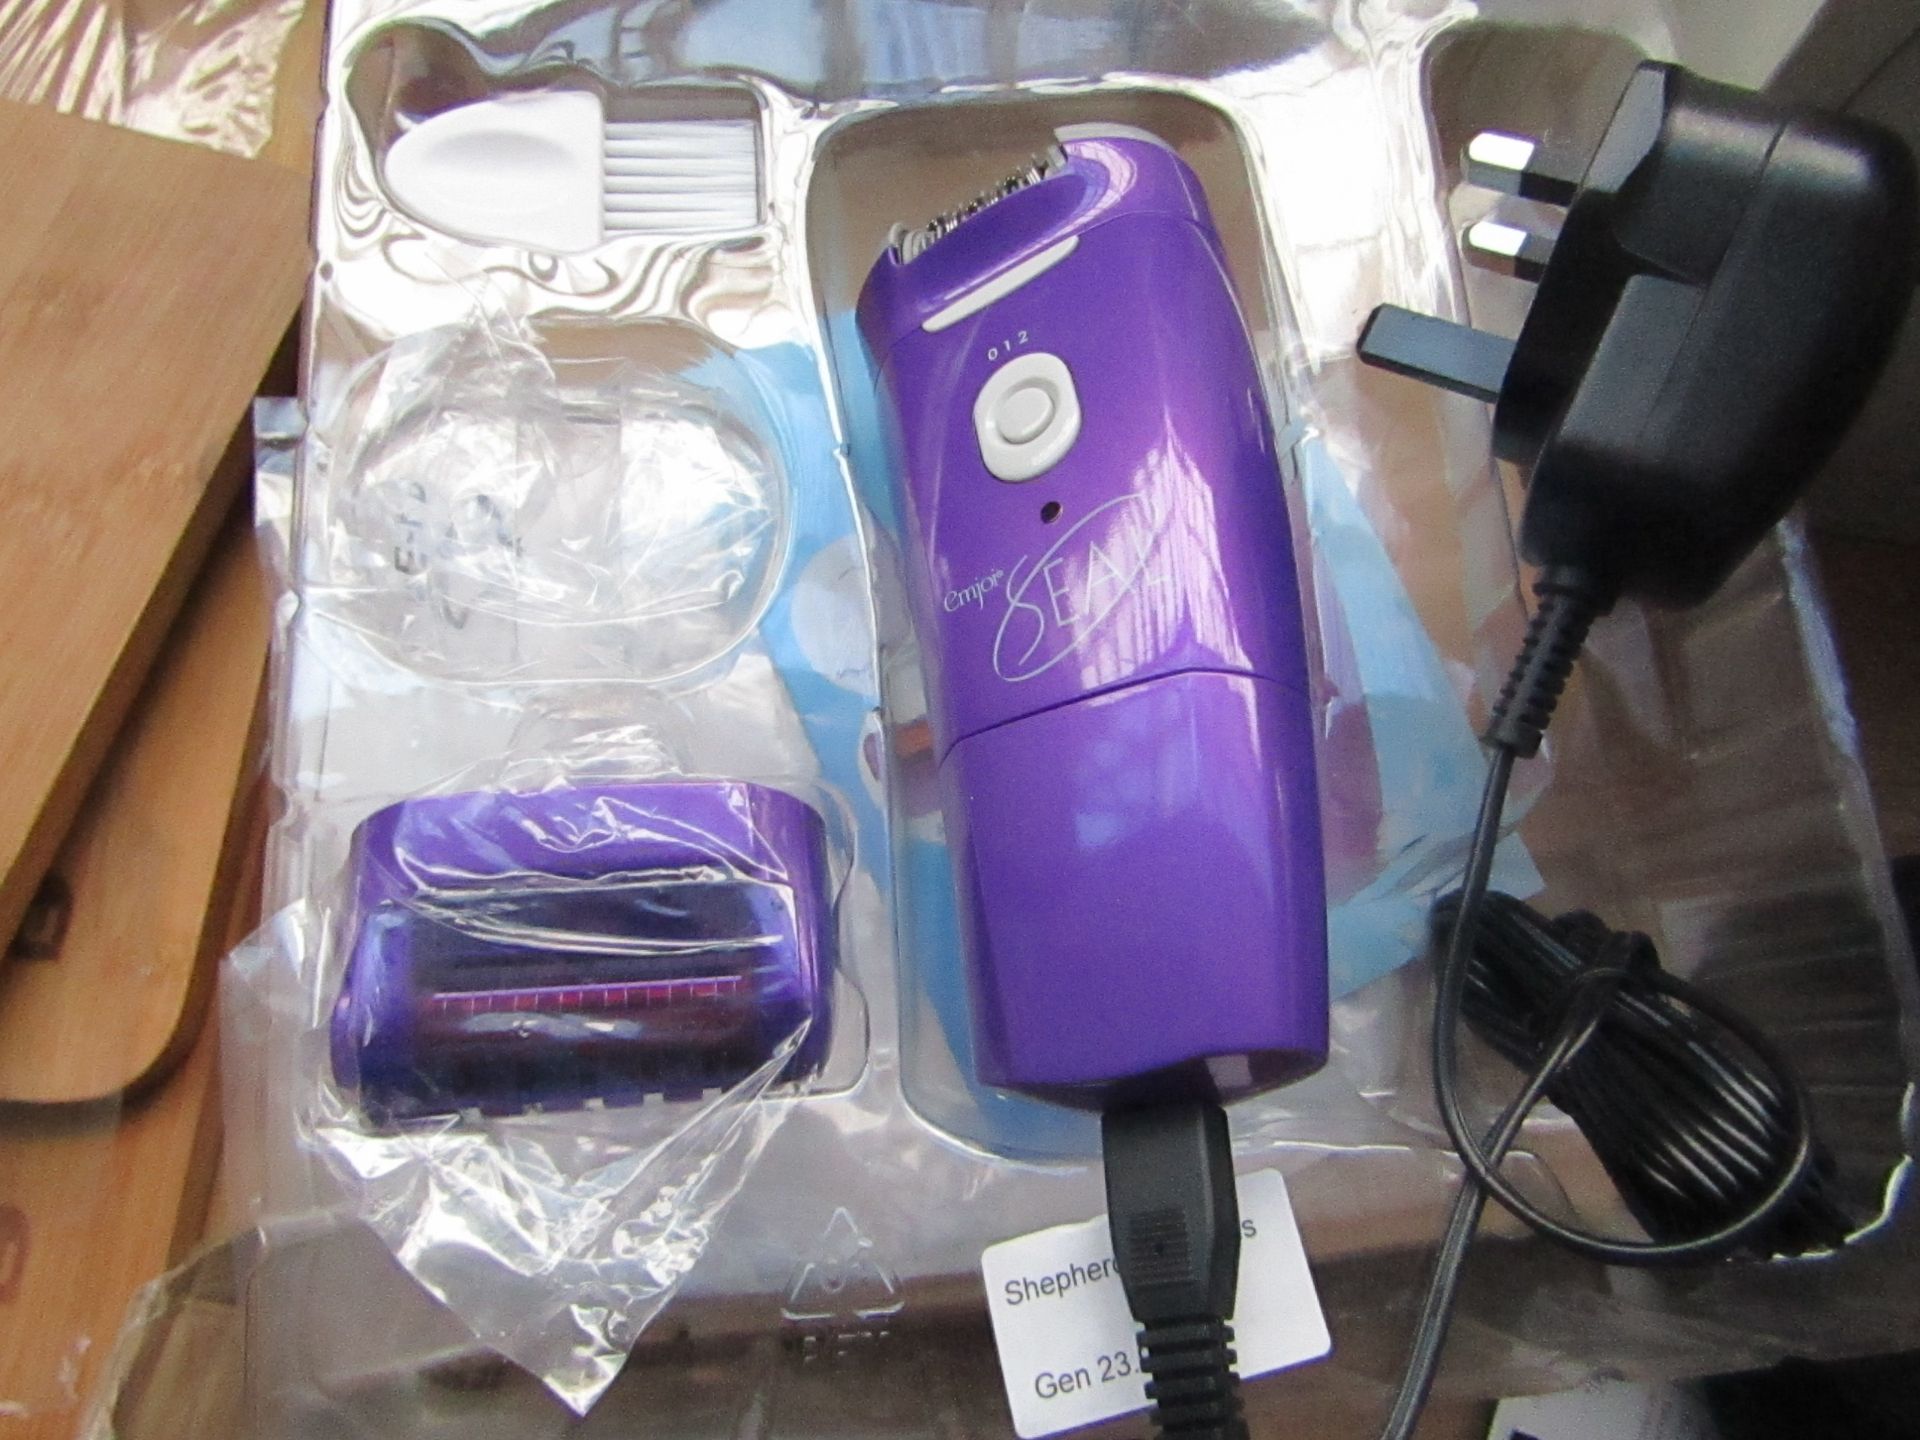 Emjoi Seal Cordless wet and dry Epilator system,  boxed. Tested working